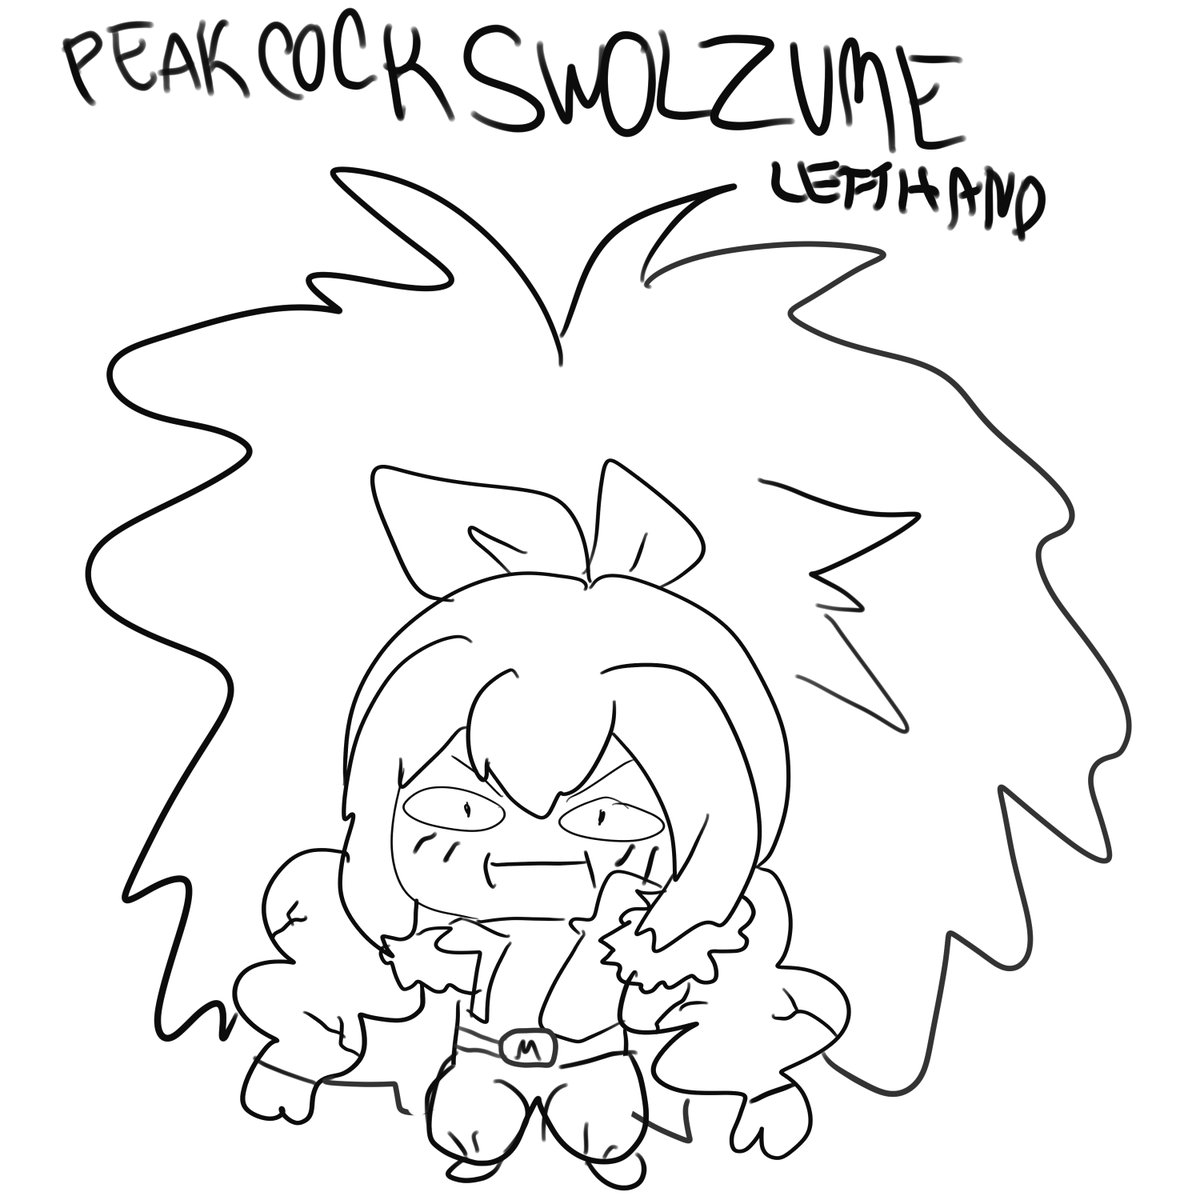 Chat redeemed left hand challenge and requested swolzume. 

Apparently Idk how to spell peacock LMFAO (click full photo to see what i mean) https://t.co/Nv86YlIwCX